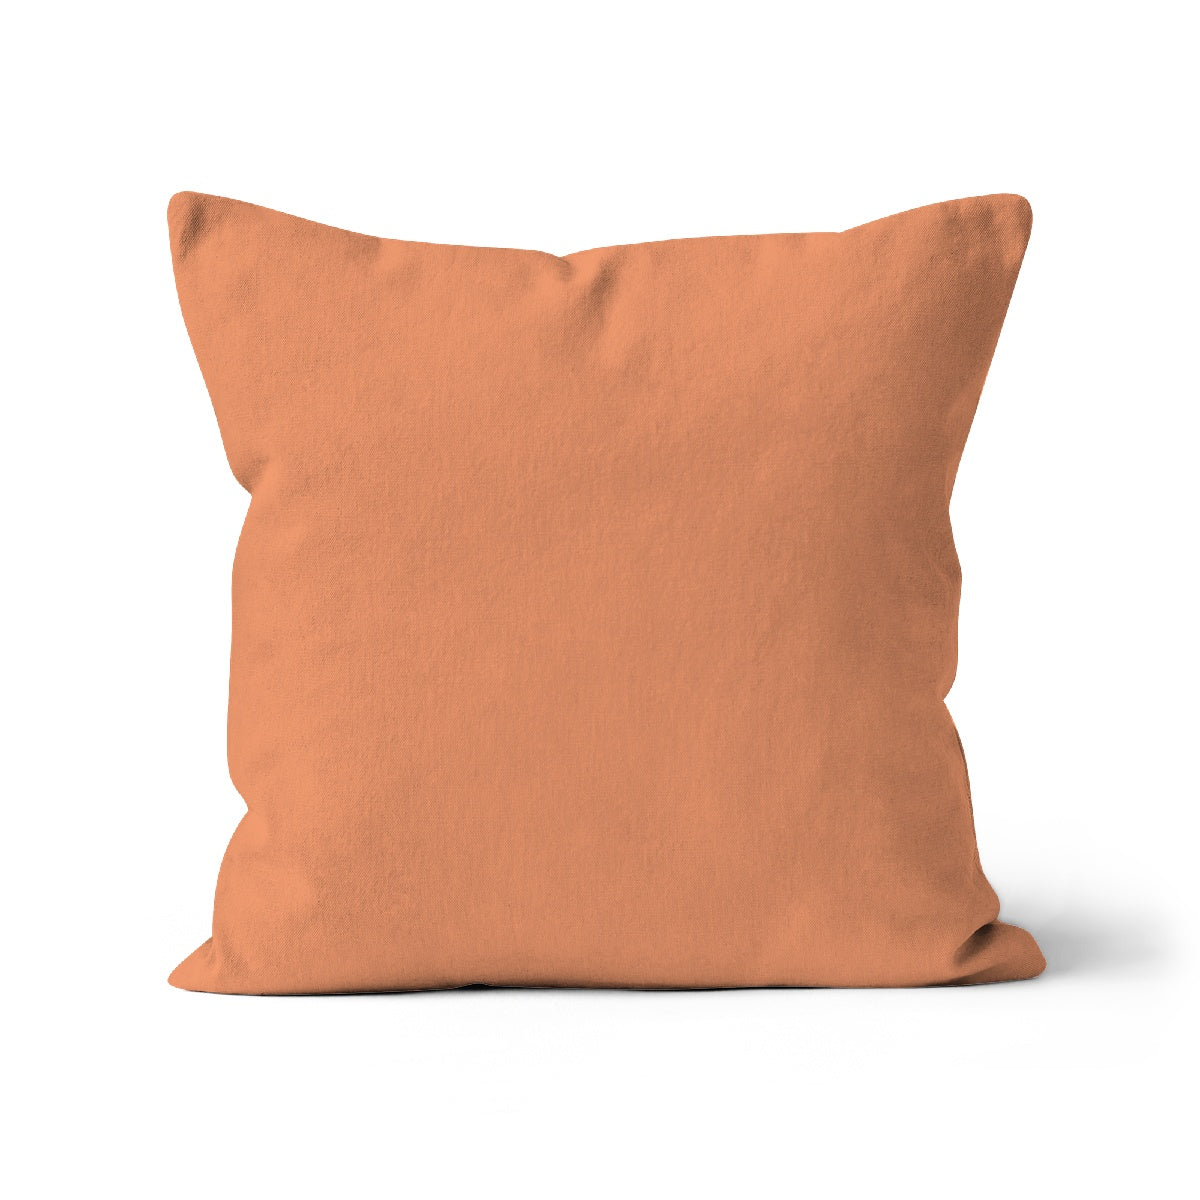 Soft orange pastel colour cushion cover. Sustainably made in the UK. British made. Free shipping, washable. Elegant Bedroom Cushion Protector, Contemporary Decor for Couch, Luxurious Decorative Faux Suede and Linen Pillowcase, Affordable Melon Pillow Cover, Buy Melon-Coloured Faux Suede and Linen Cushion Cover Online, Designer Cushion Cover with Vibrant Patterns, Faux Suede and Linen Melon Pillowcase.